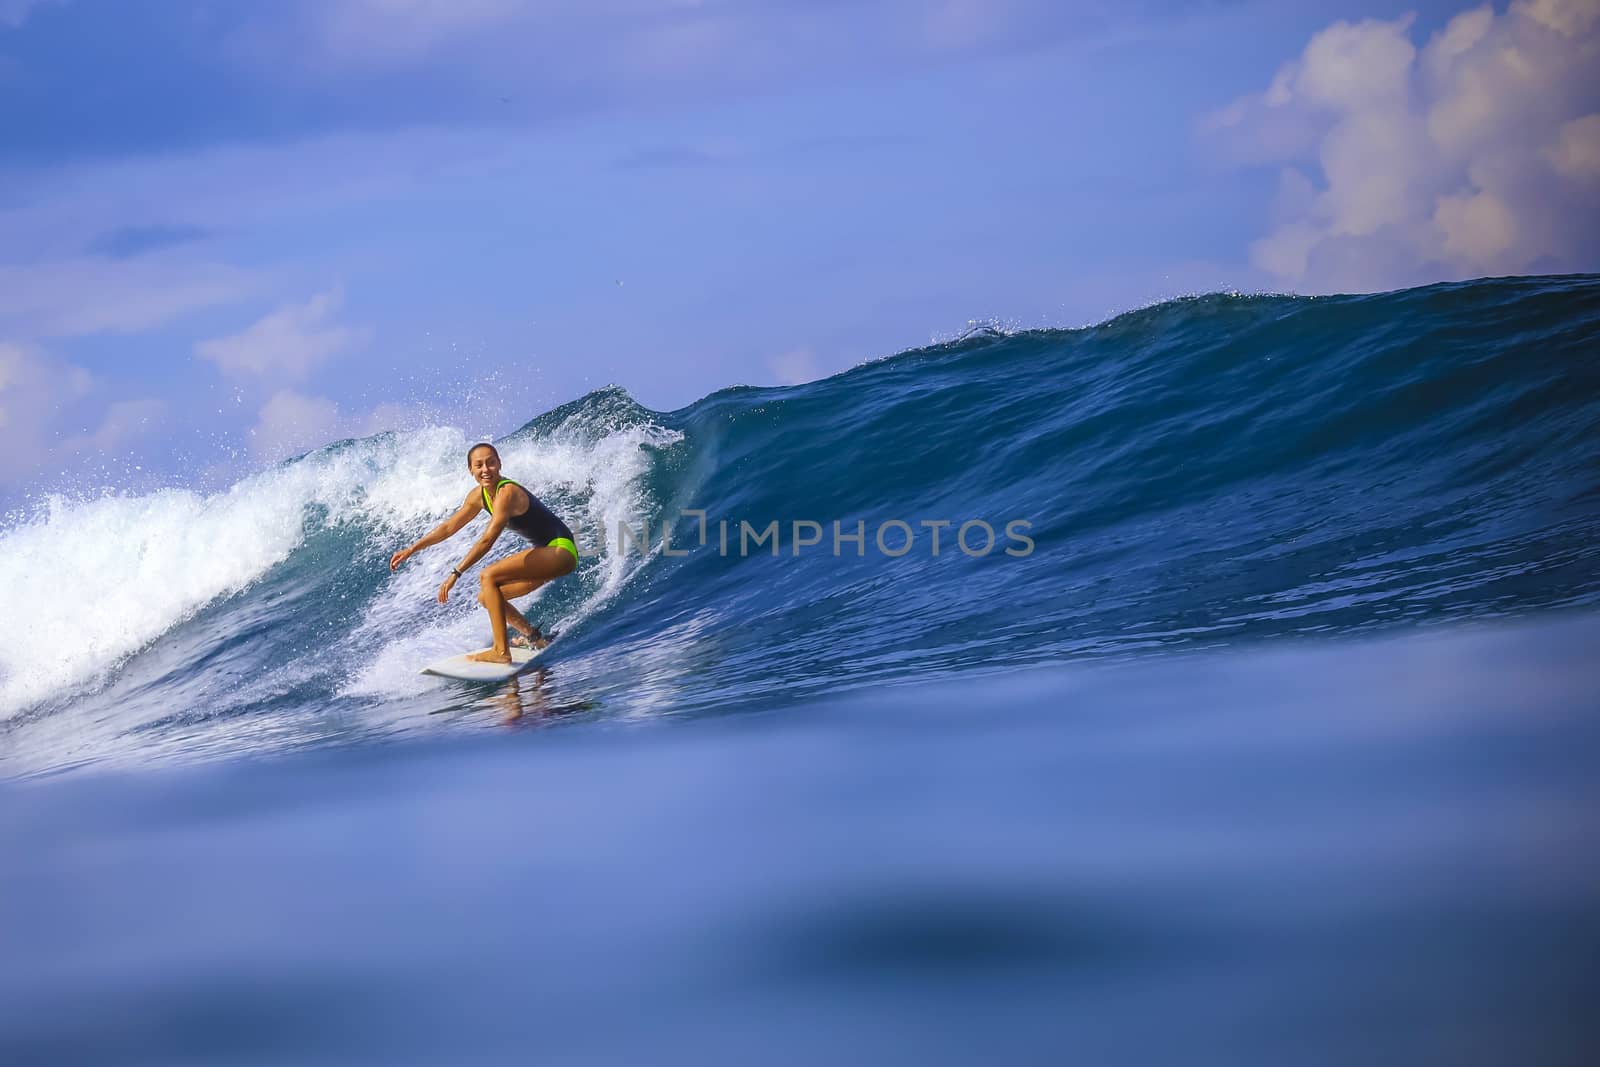 Surfer girl on Amazing Blue Wave by truphoto